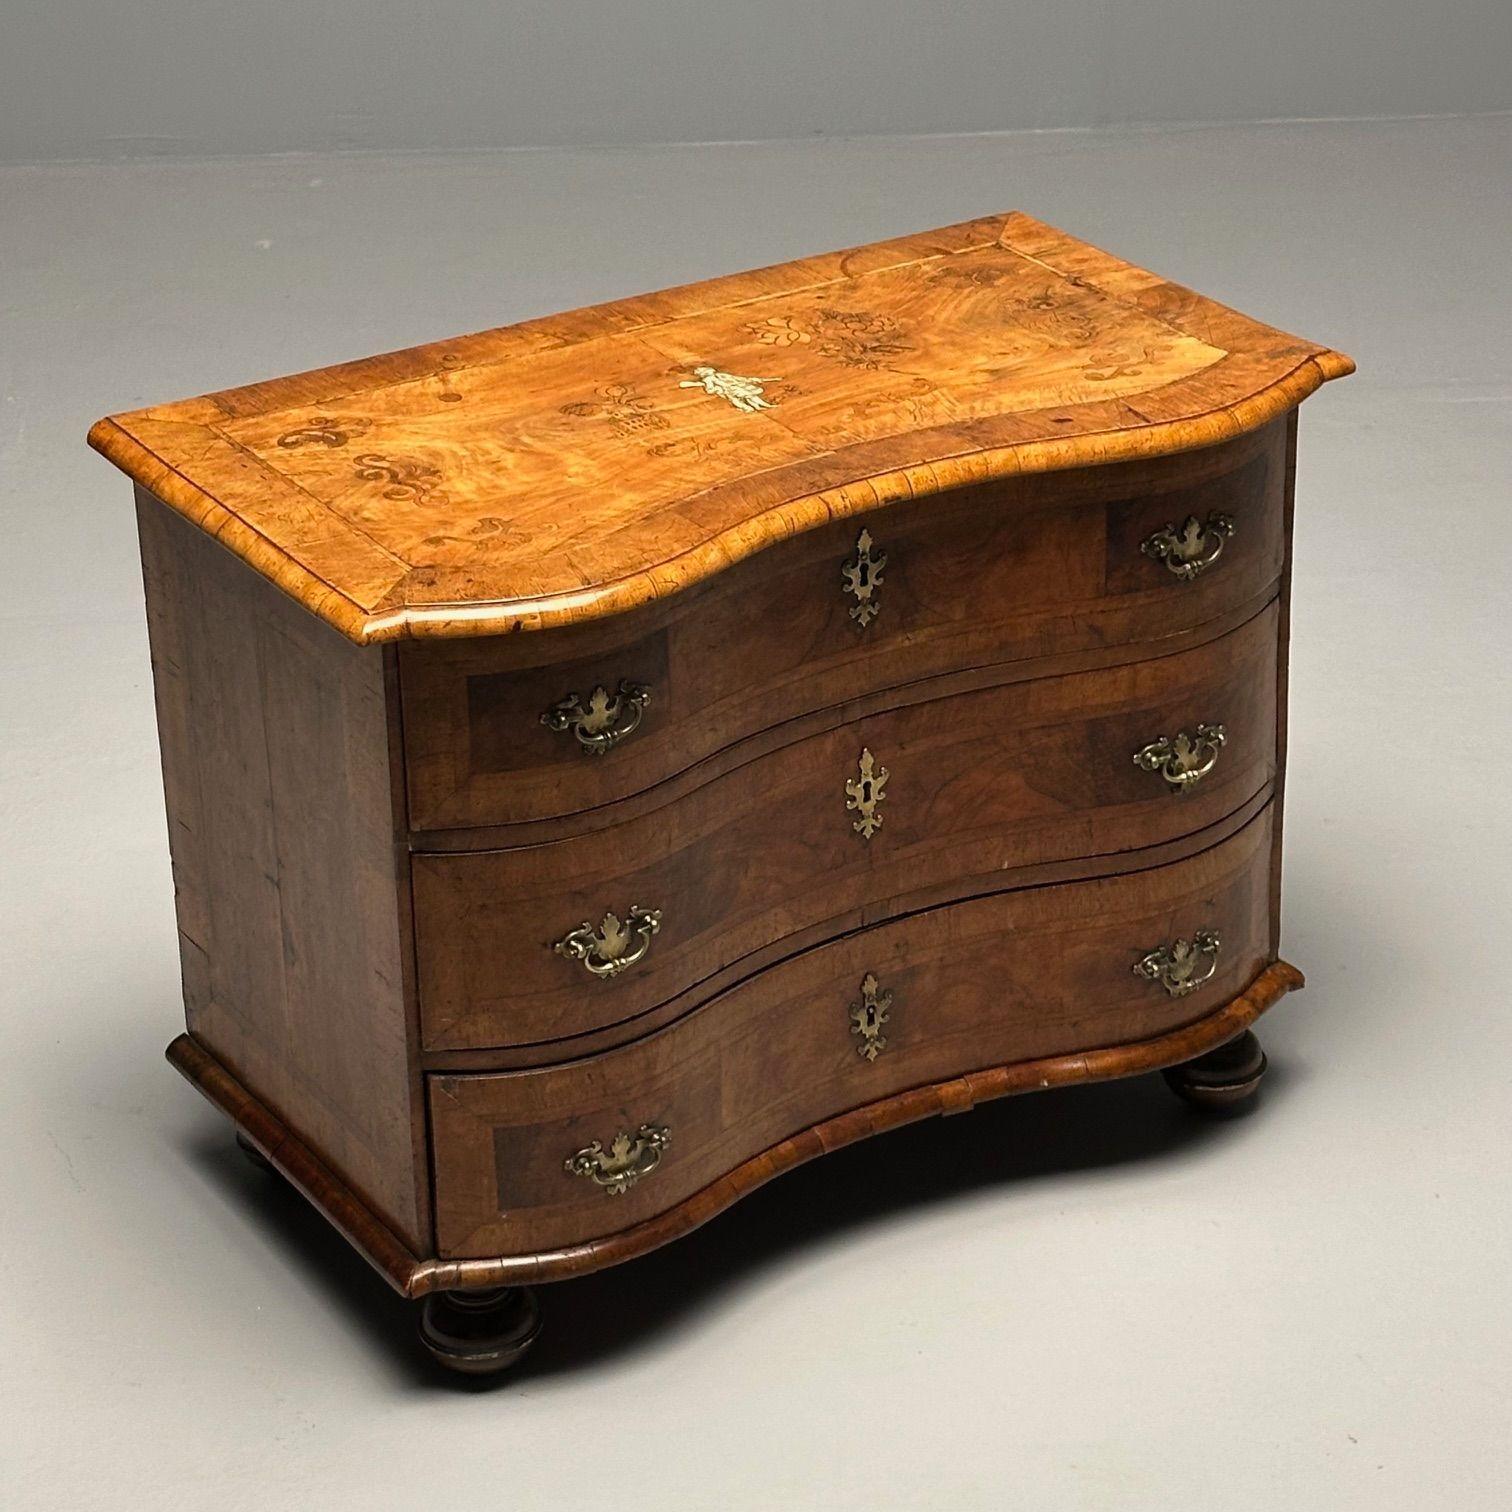 German Baroque Fruit Wood Marquetry Inlaid Cabinet / Commode, Gulc Nachi

18th-early 19th century fruit wood marquetry inlaid commode chest or bedside stand. A wonderful fruit-wood inlaid marquetry signed commode. Finest signed South